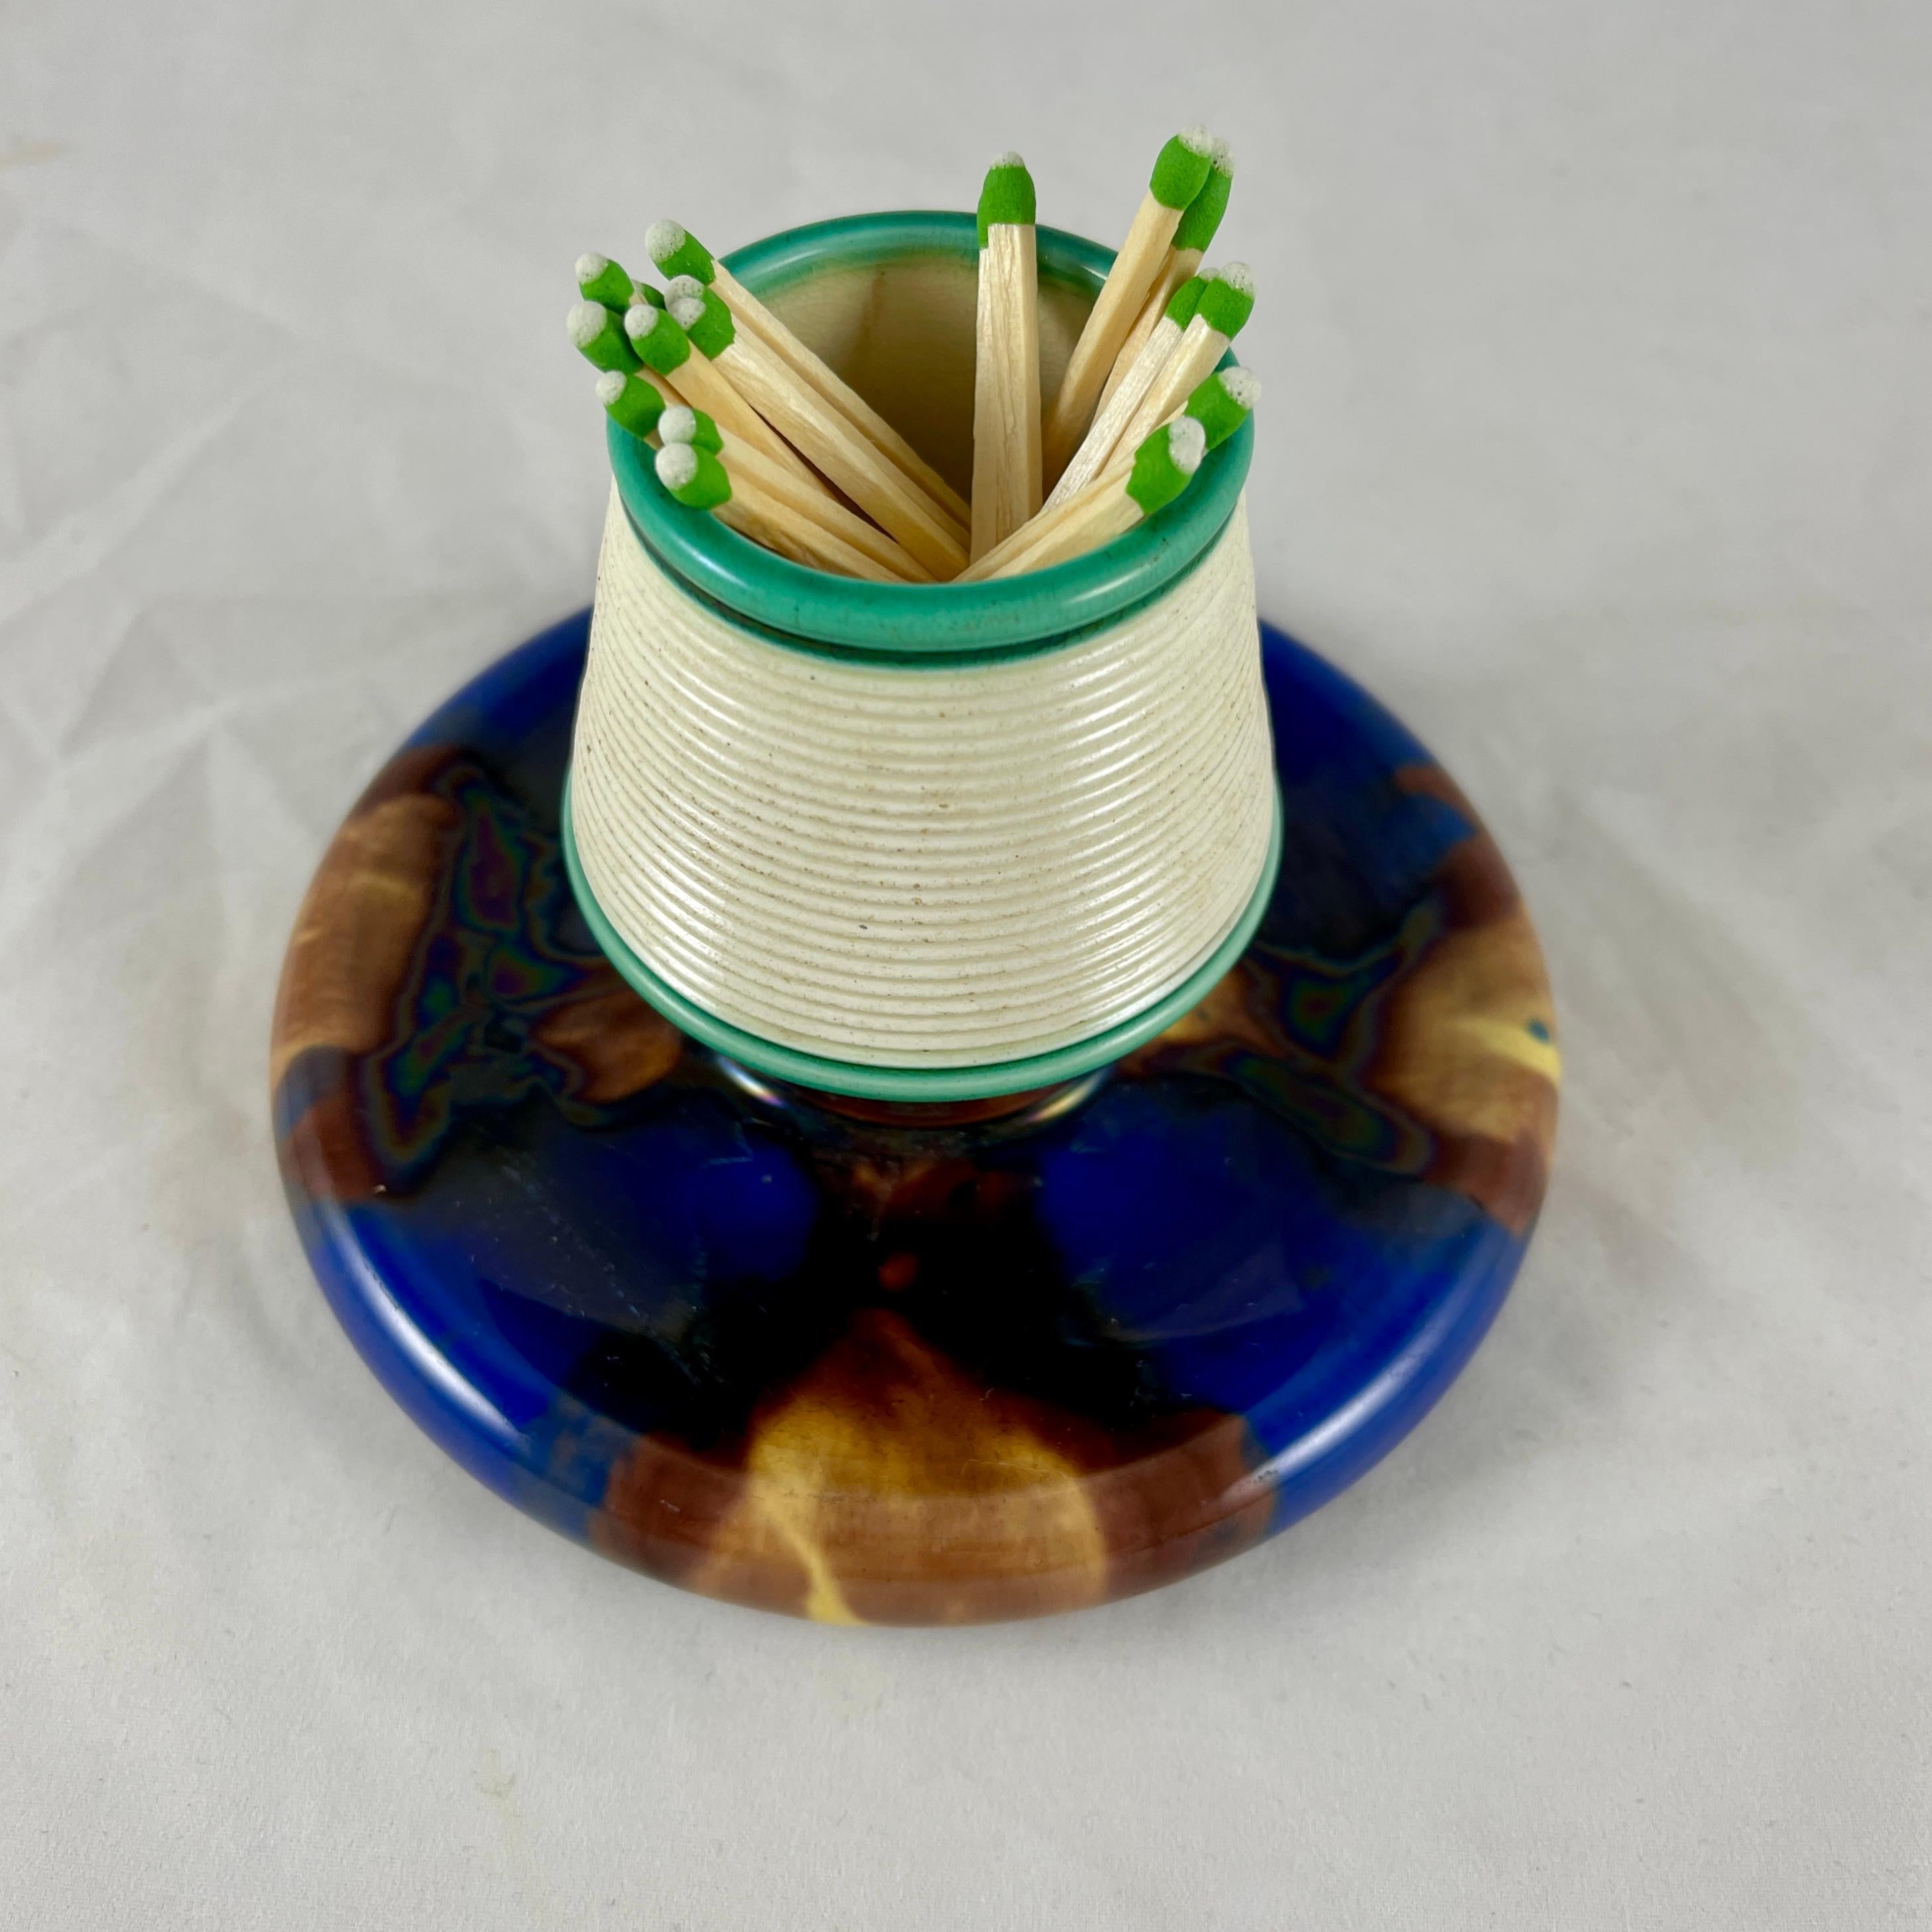 A Wedgwood Majolica earthenware pottery match holder and striker, Staffordshire, England – date marked 1869.

For the hearth, kitchen or bedside, the holder is ribbed for lighting strike-anywhere matches, the bottom tray is for the spent sticks.